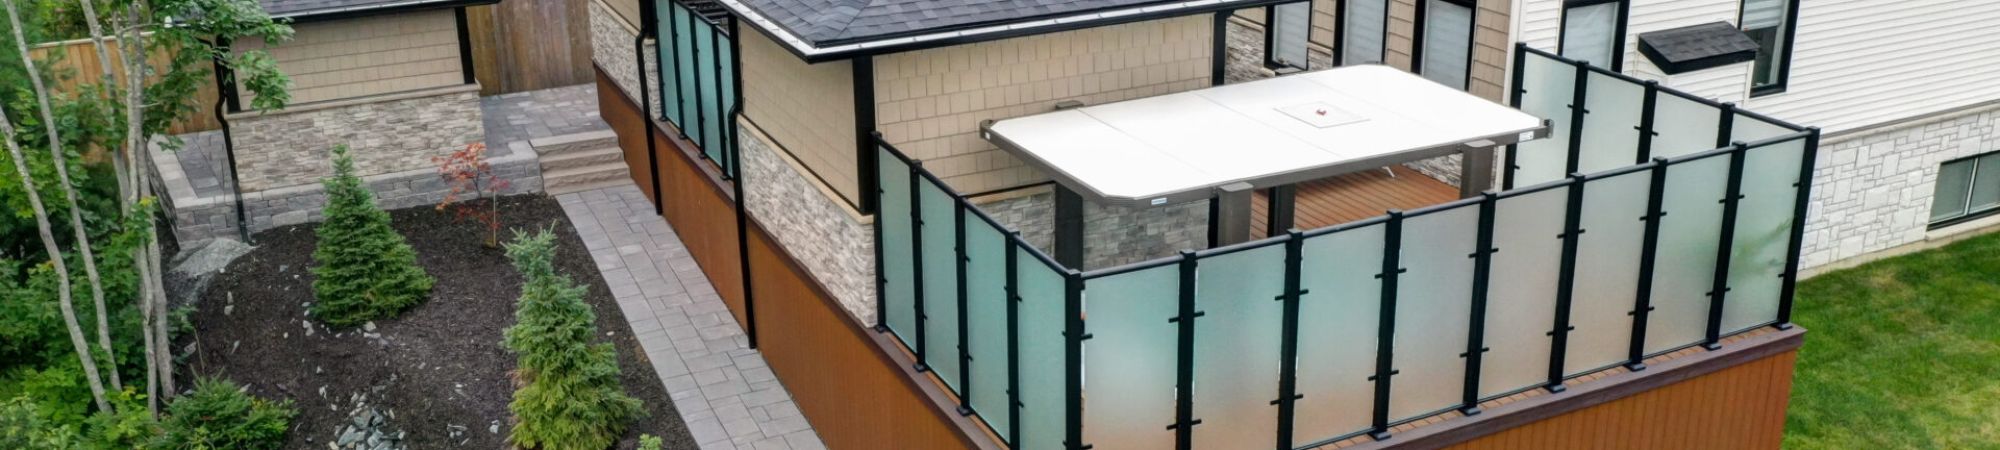 Glass Privacy Wall surround for hot tub